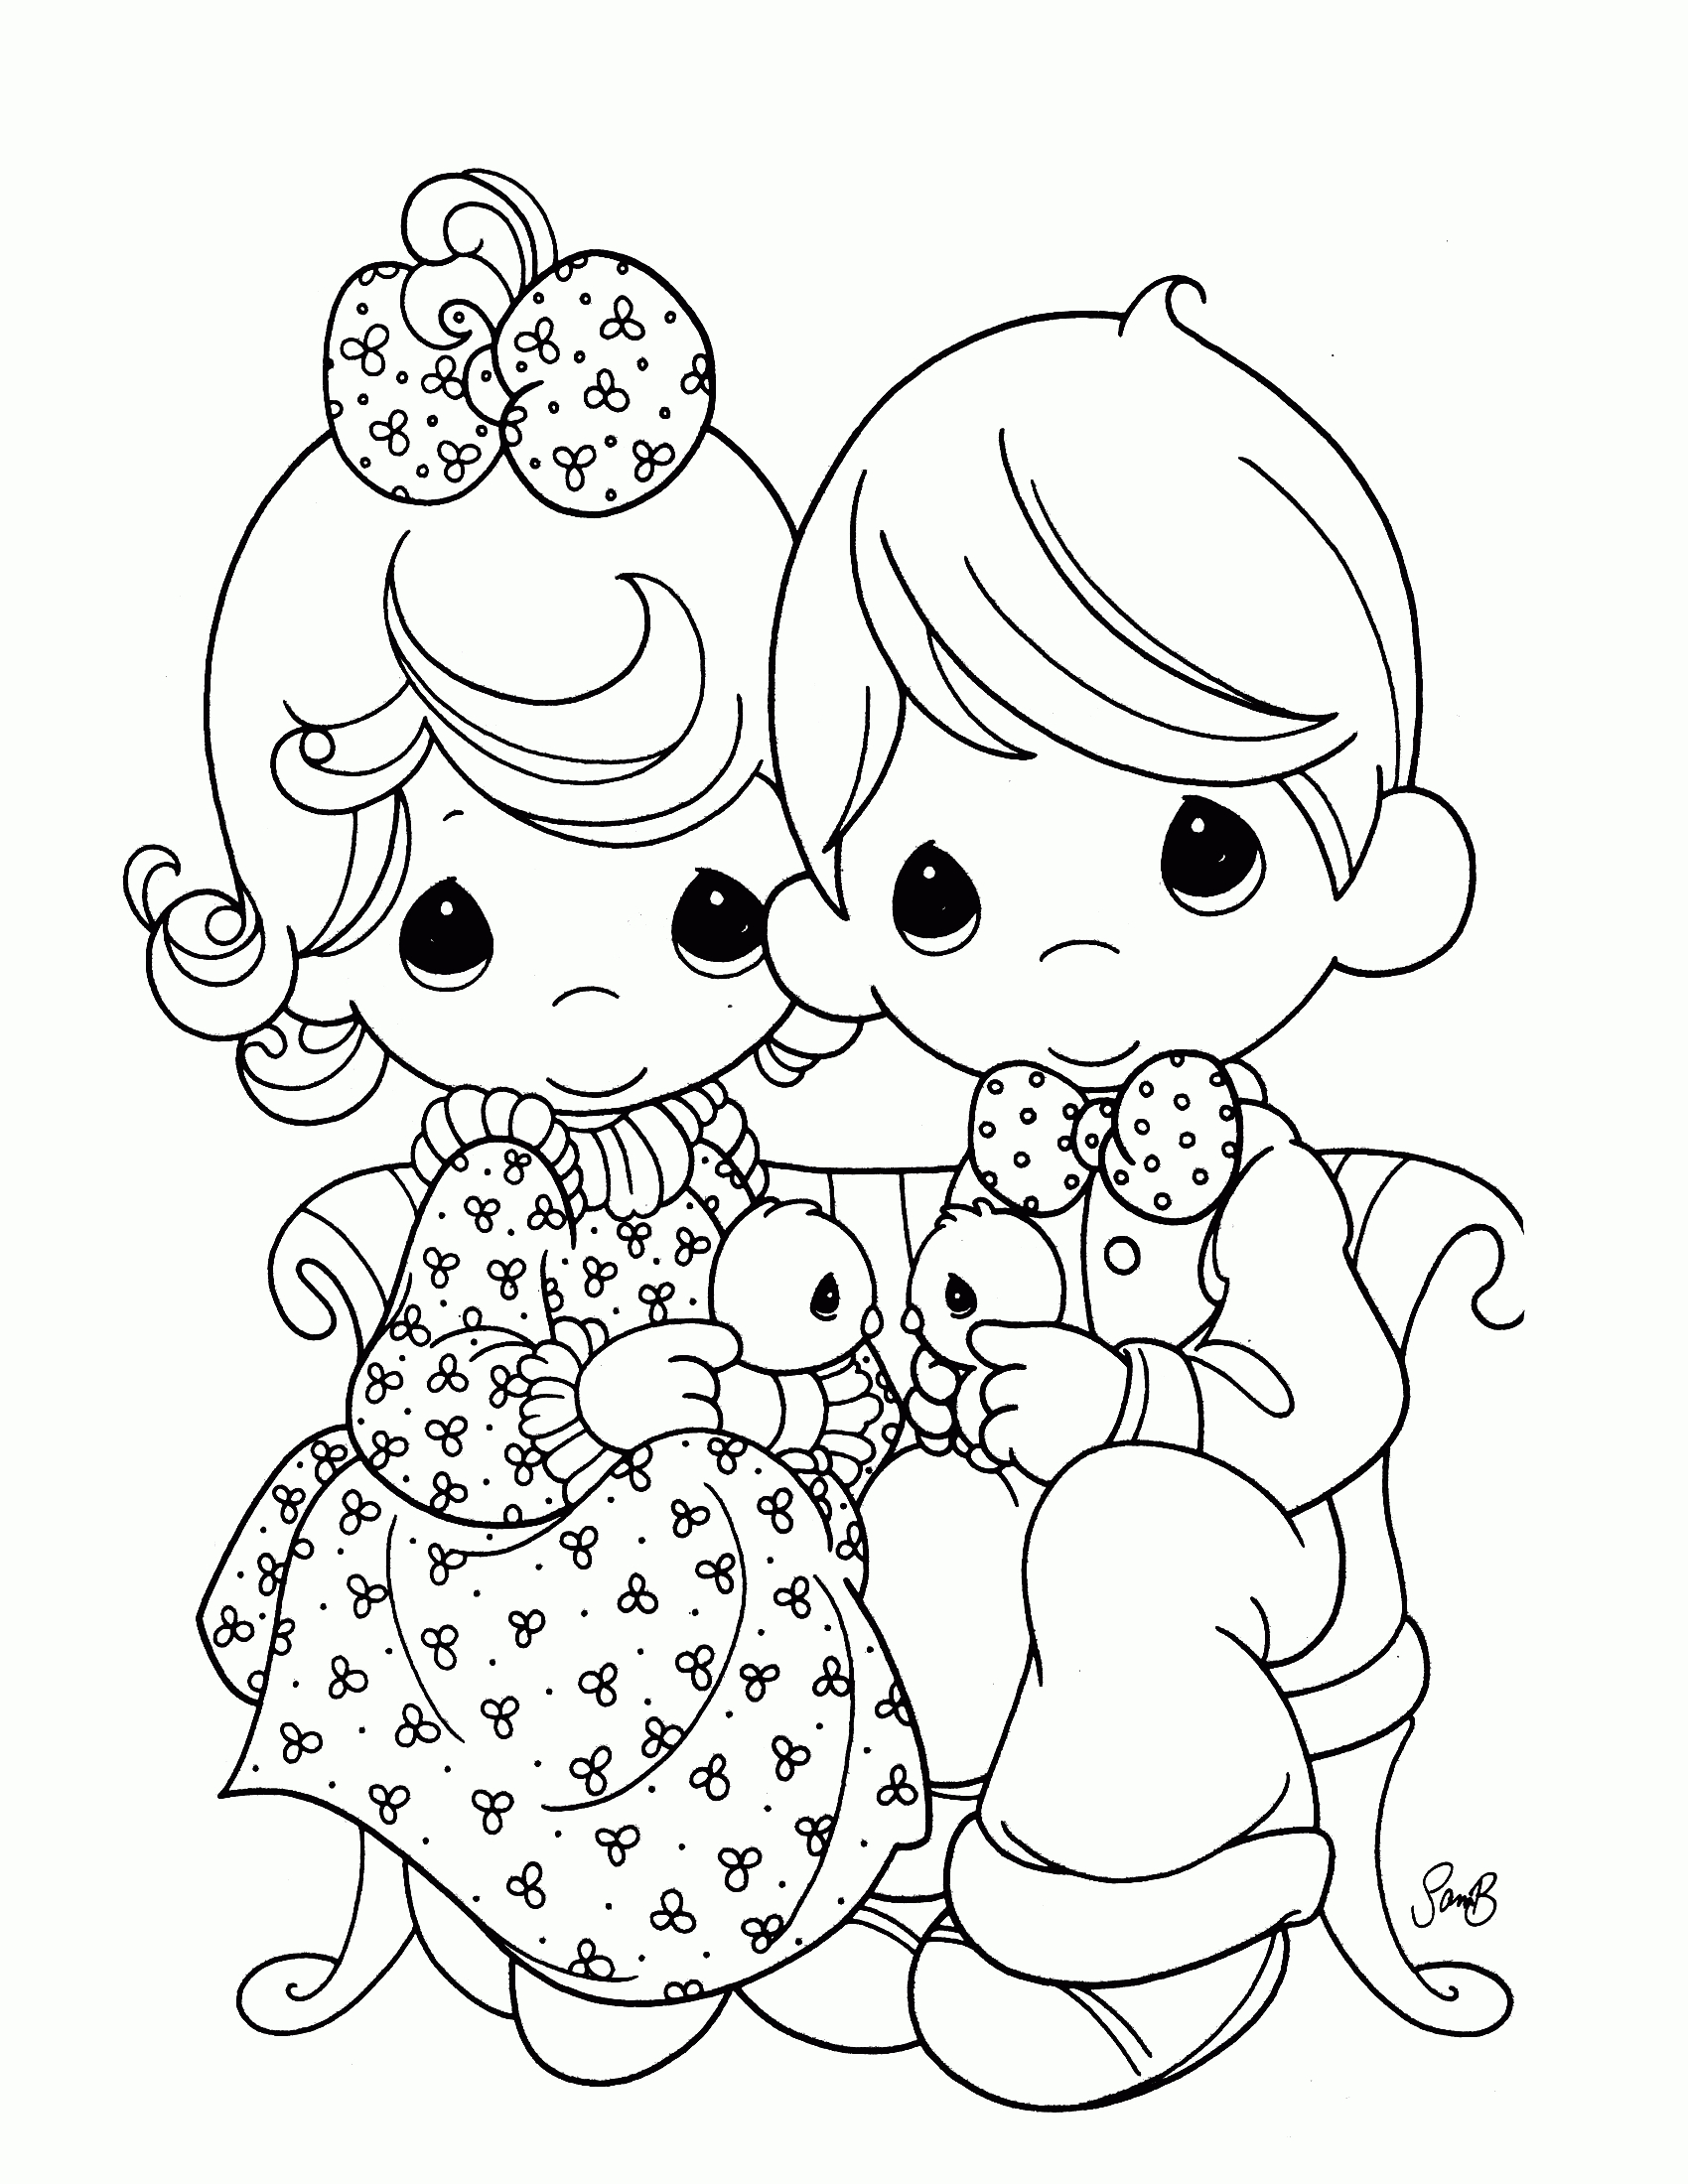 Precious Moments Letters Coloring Pages Coloring Pages Precious Moments Coloring Pages For Kids And Adults